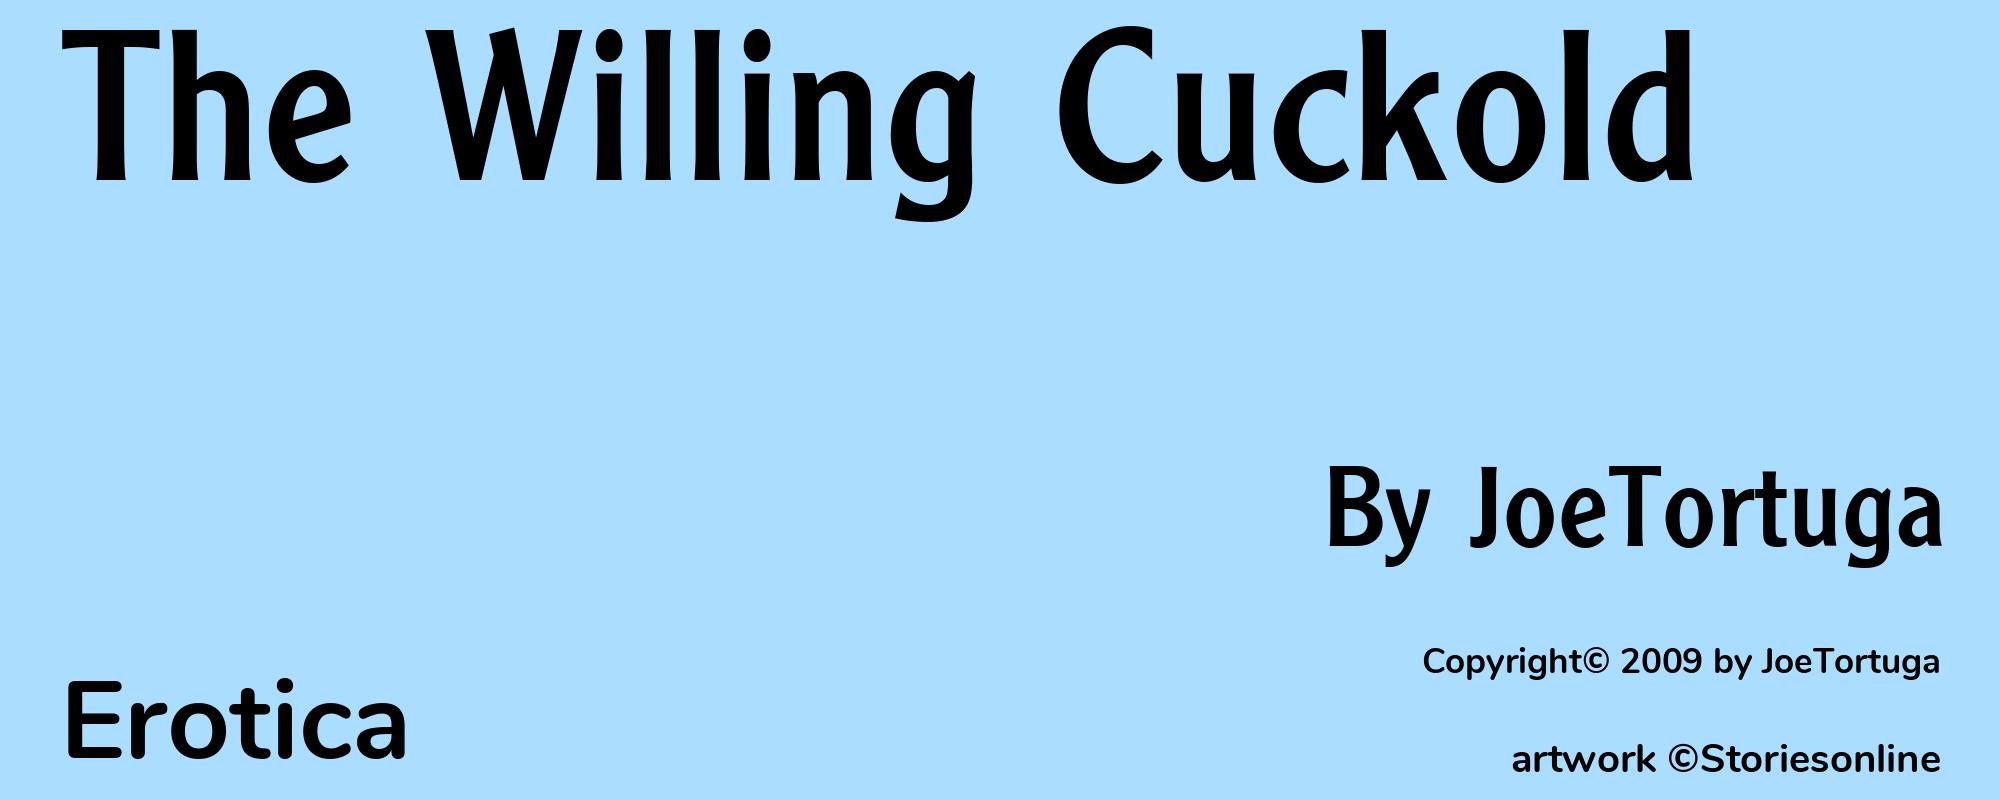 The Willing Cuckold - Cover